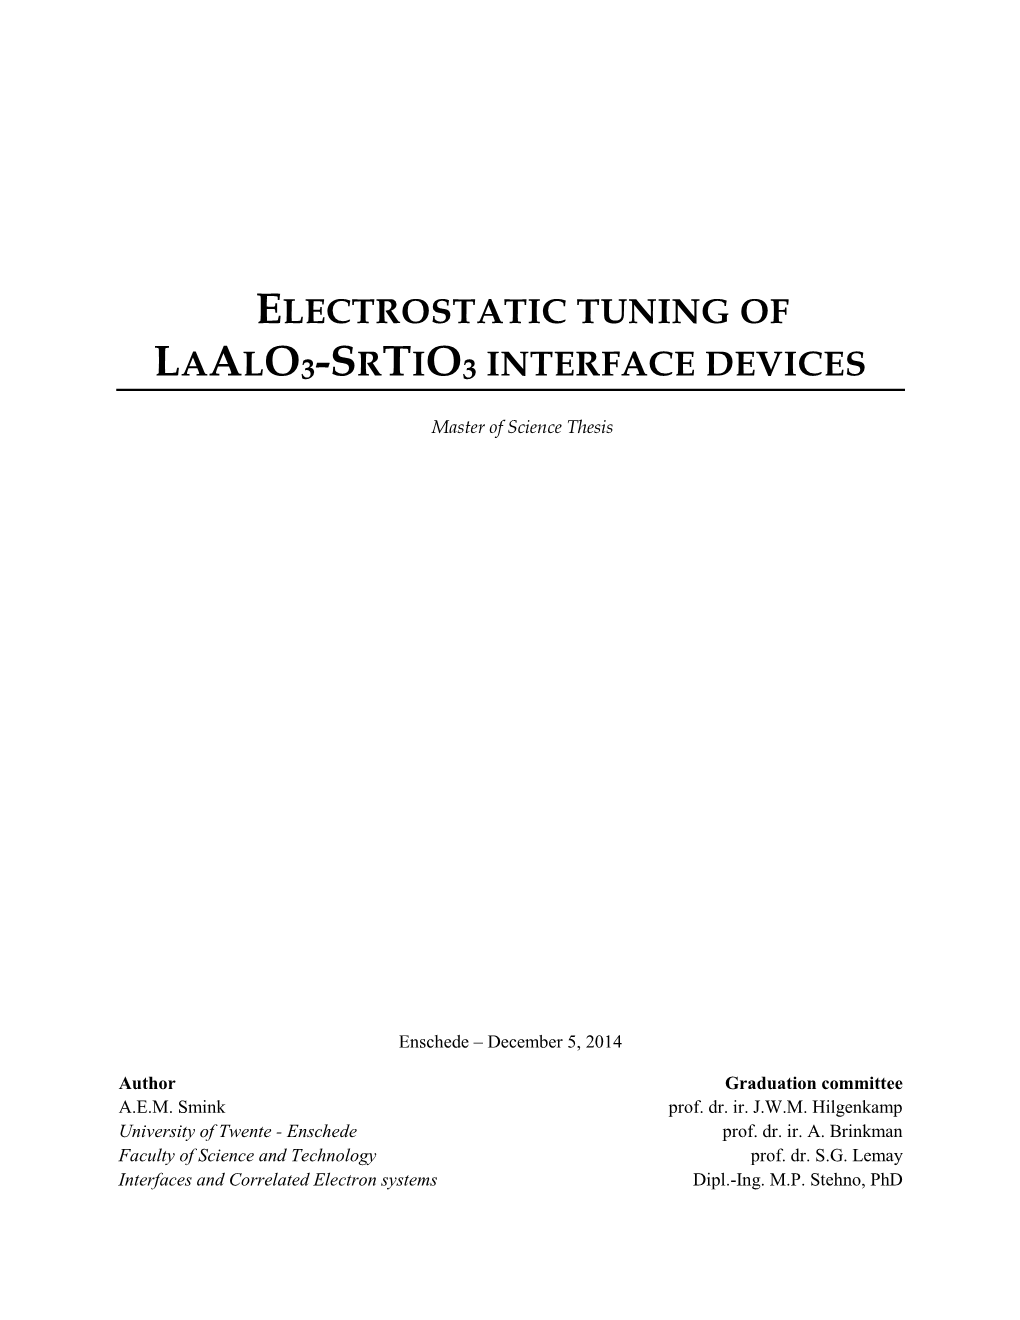 Electrostatic Tuning of Laalo3-Srtio3 Interface Devices